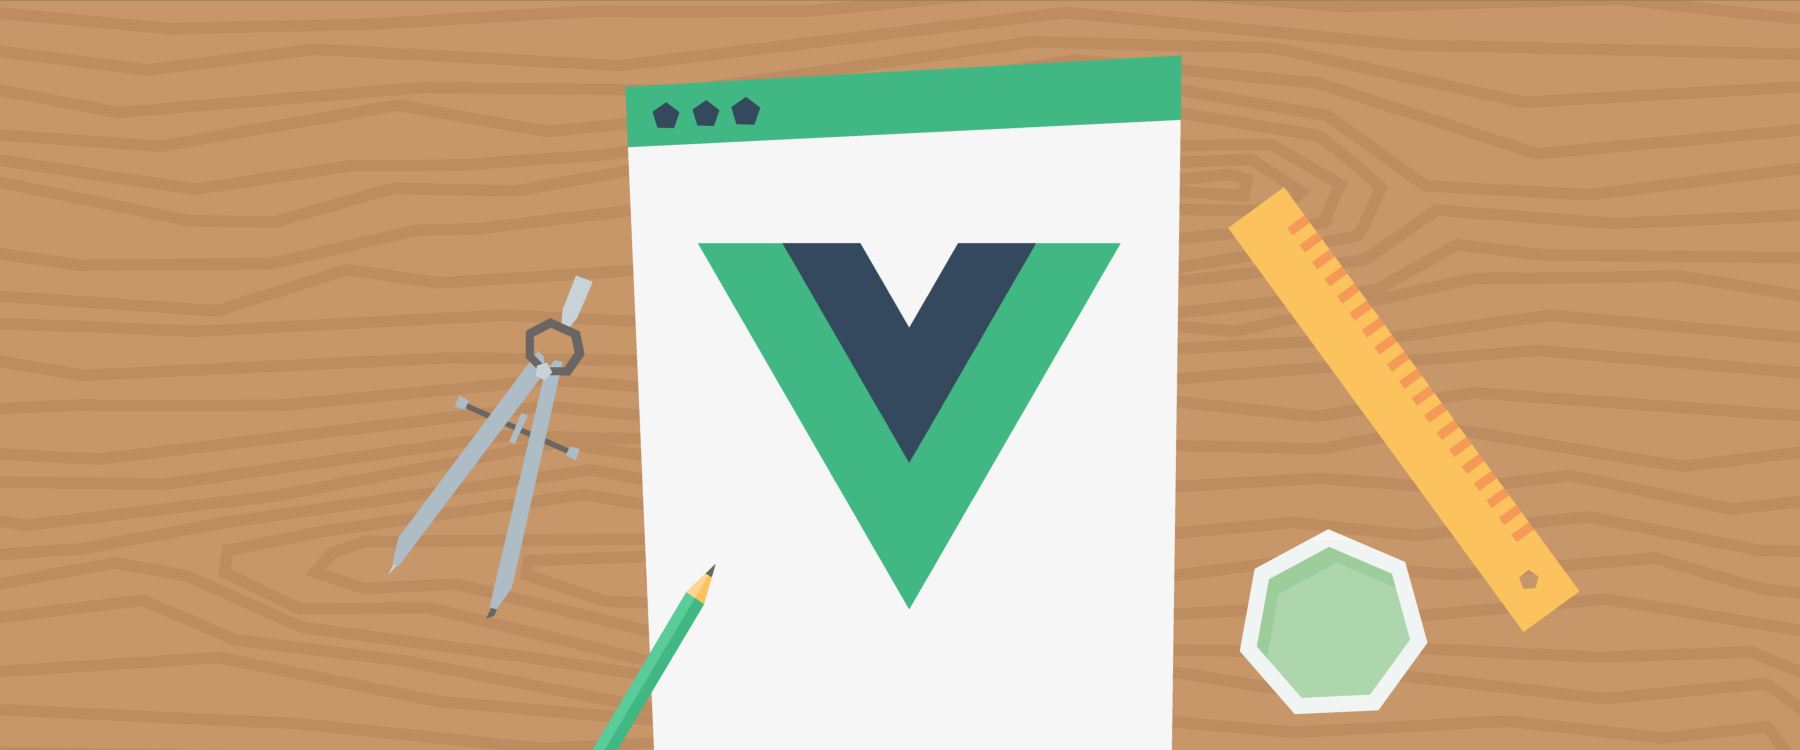 How to power up your website with Vue.js and minimal effort